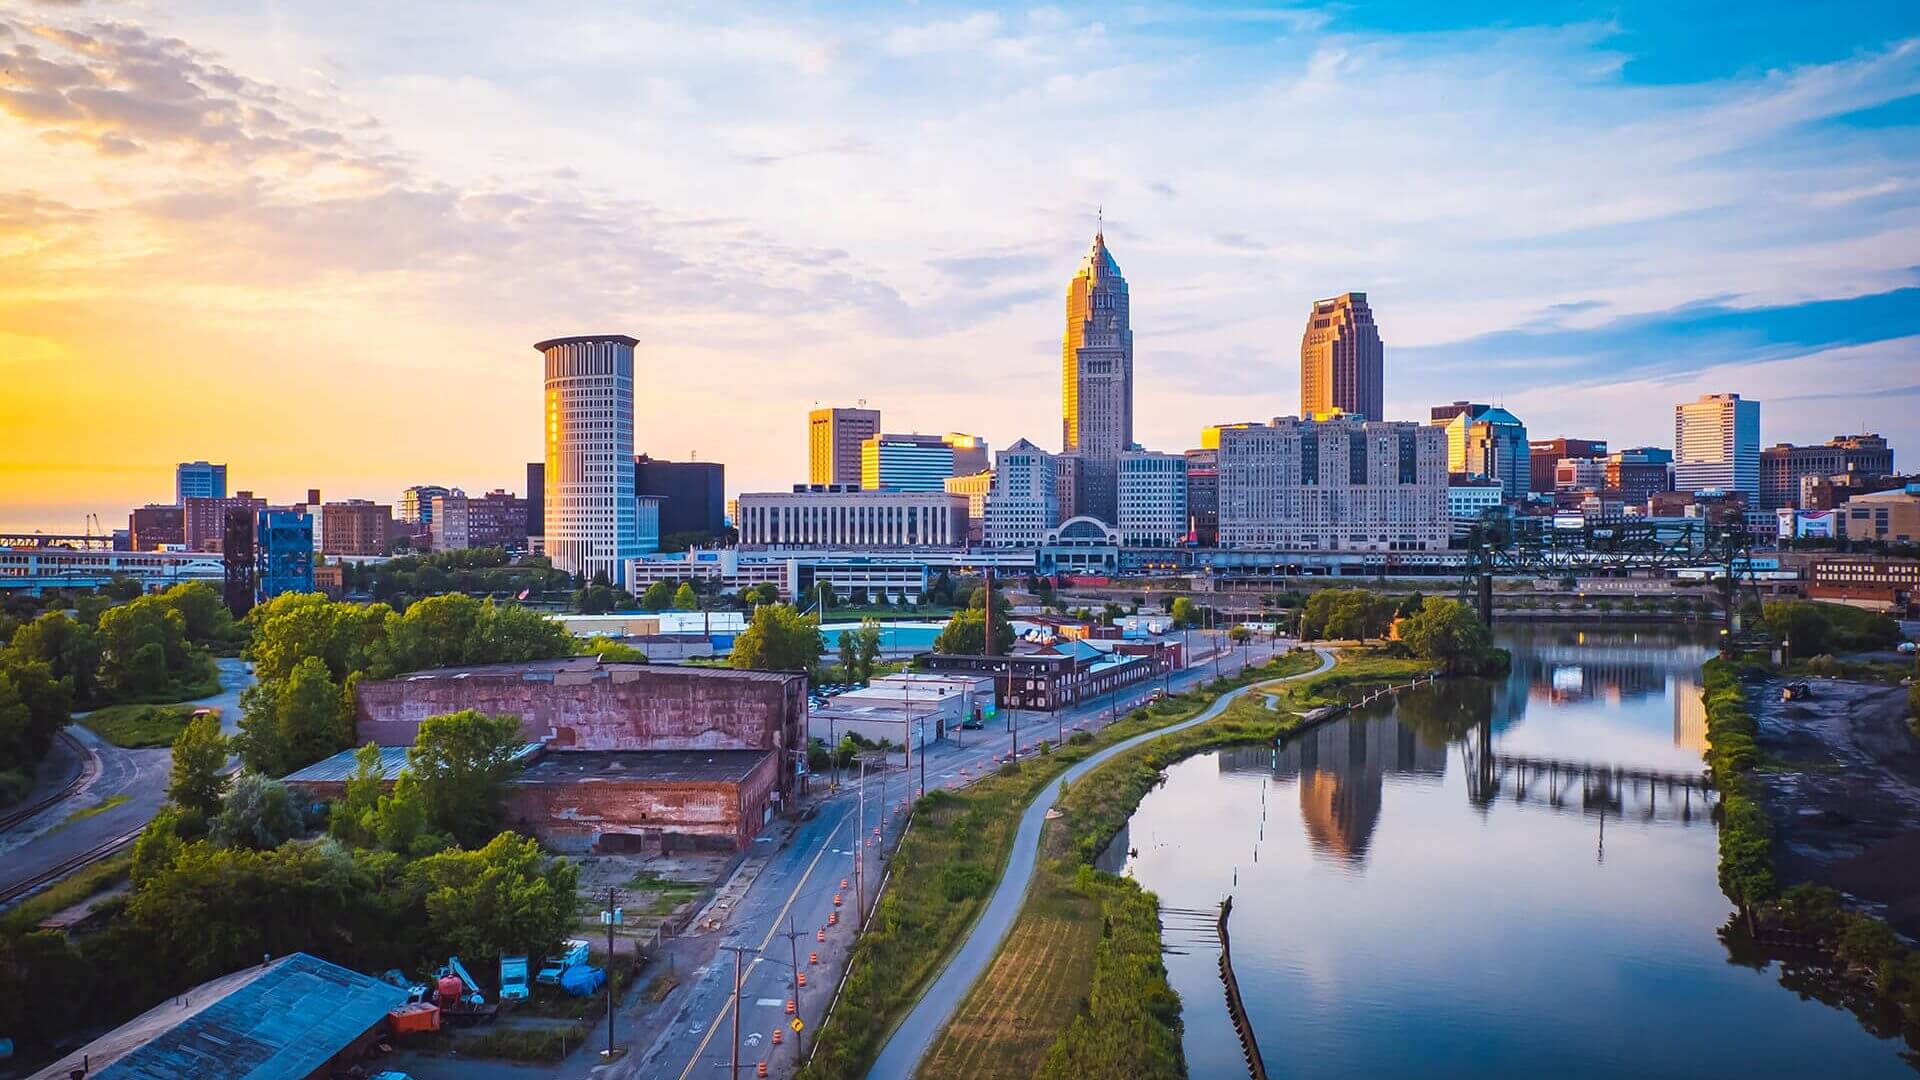 Sunset in Cleveland, United States